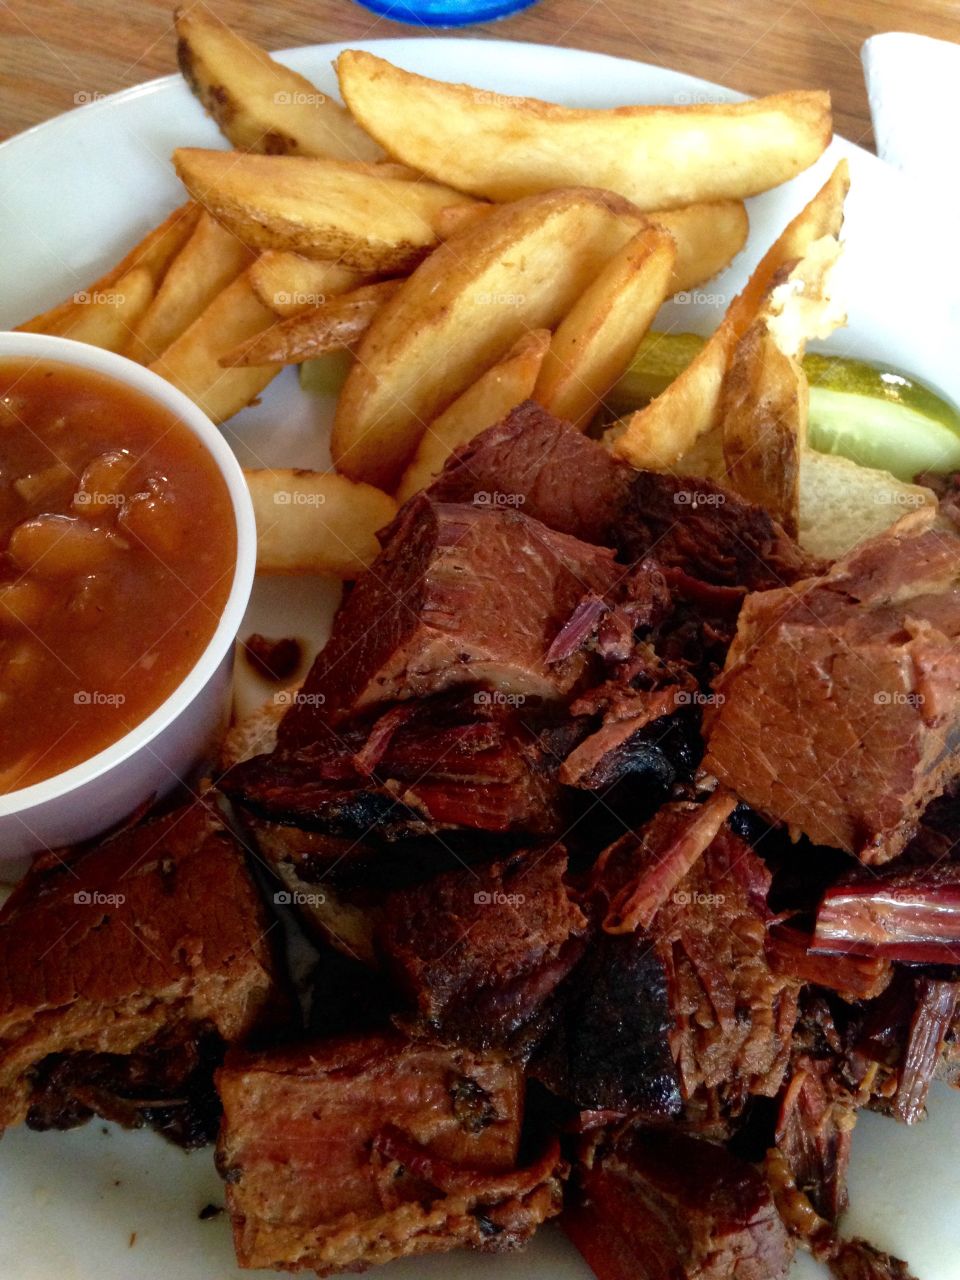 Burnt Ends. Burnt Ends, French Fries and Baked Beans. A Kansas City BBQ favorite!